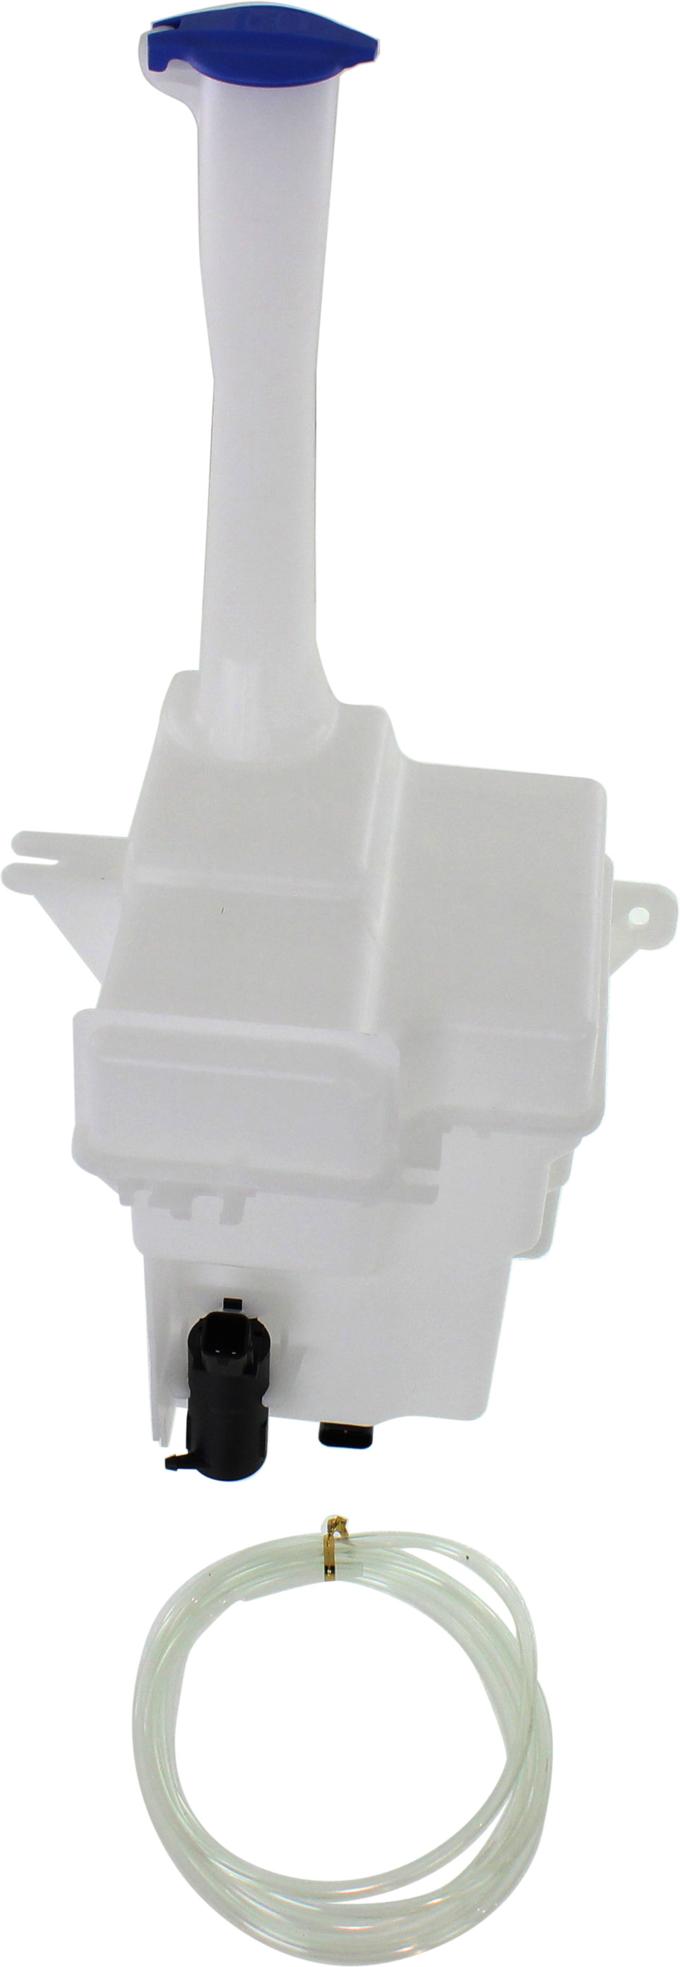 Washer Reservoir Single - Replacement 2011-2012 Sonata 4 Cyl 2.0L